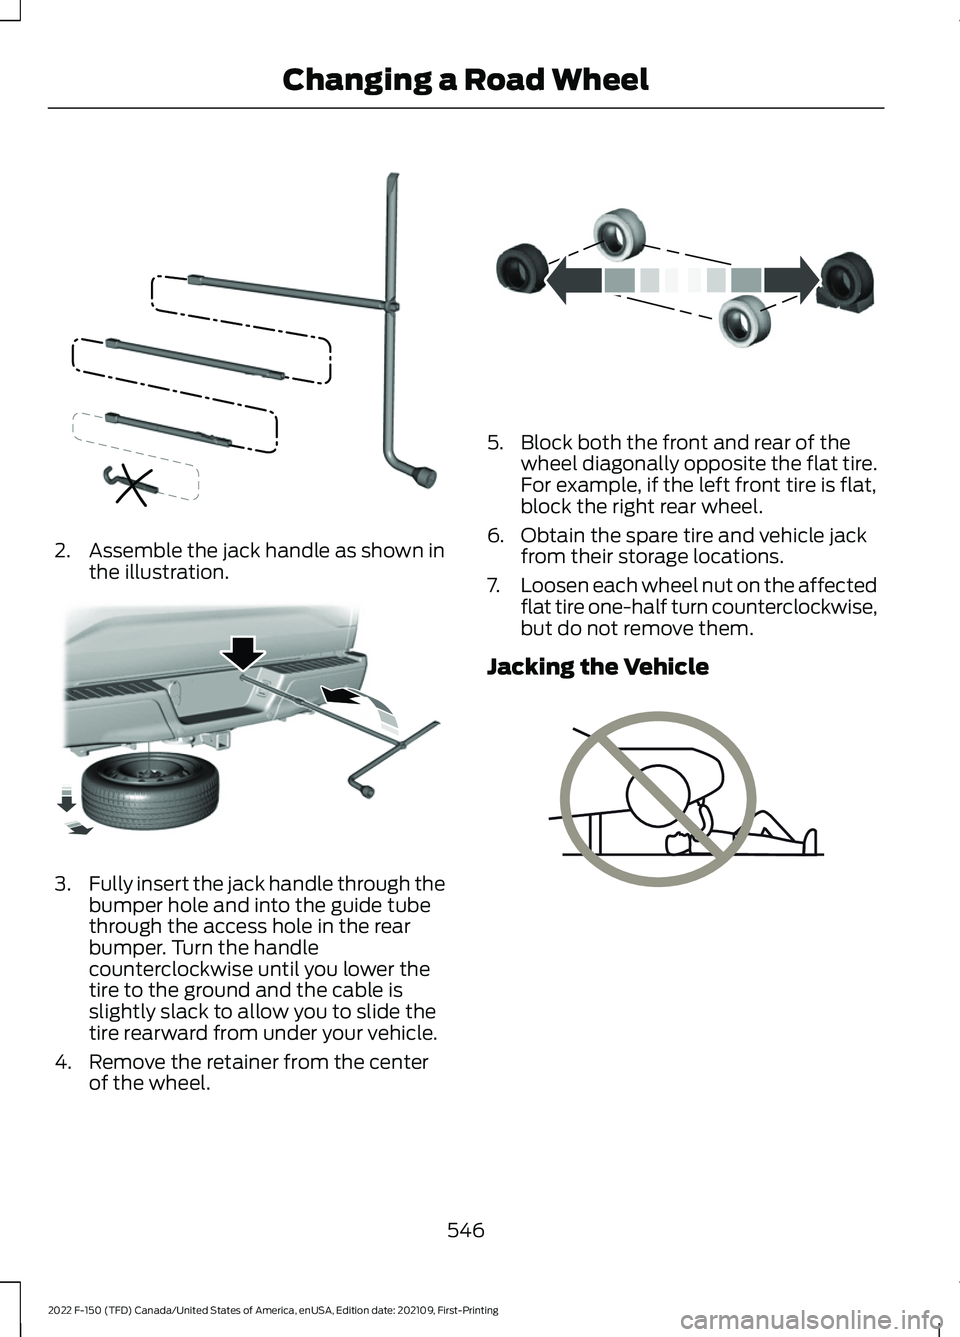 FORD F-150 2022  Owners Manual 2. Assemble the jack handle as shown in
the illustration. 3.
Fully insert the jack handle through the
bumper hole and into the guide tube
through the access hole in the rear
bumper. Turn the handle
co